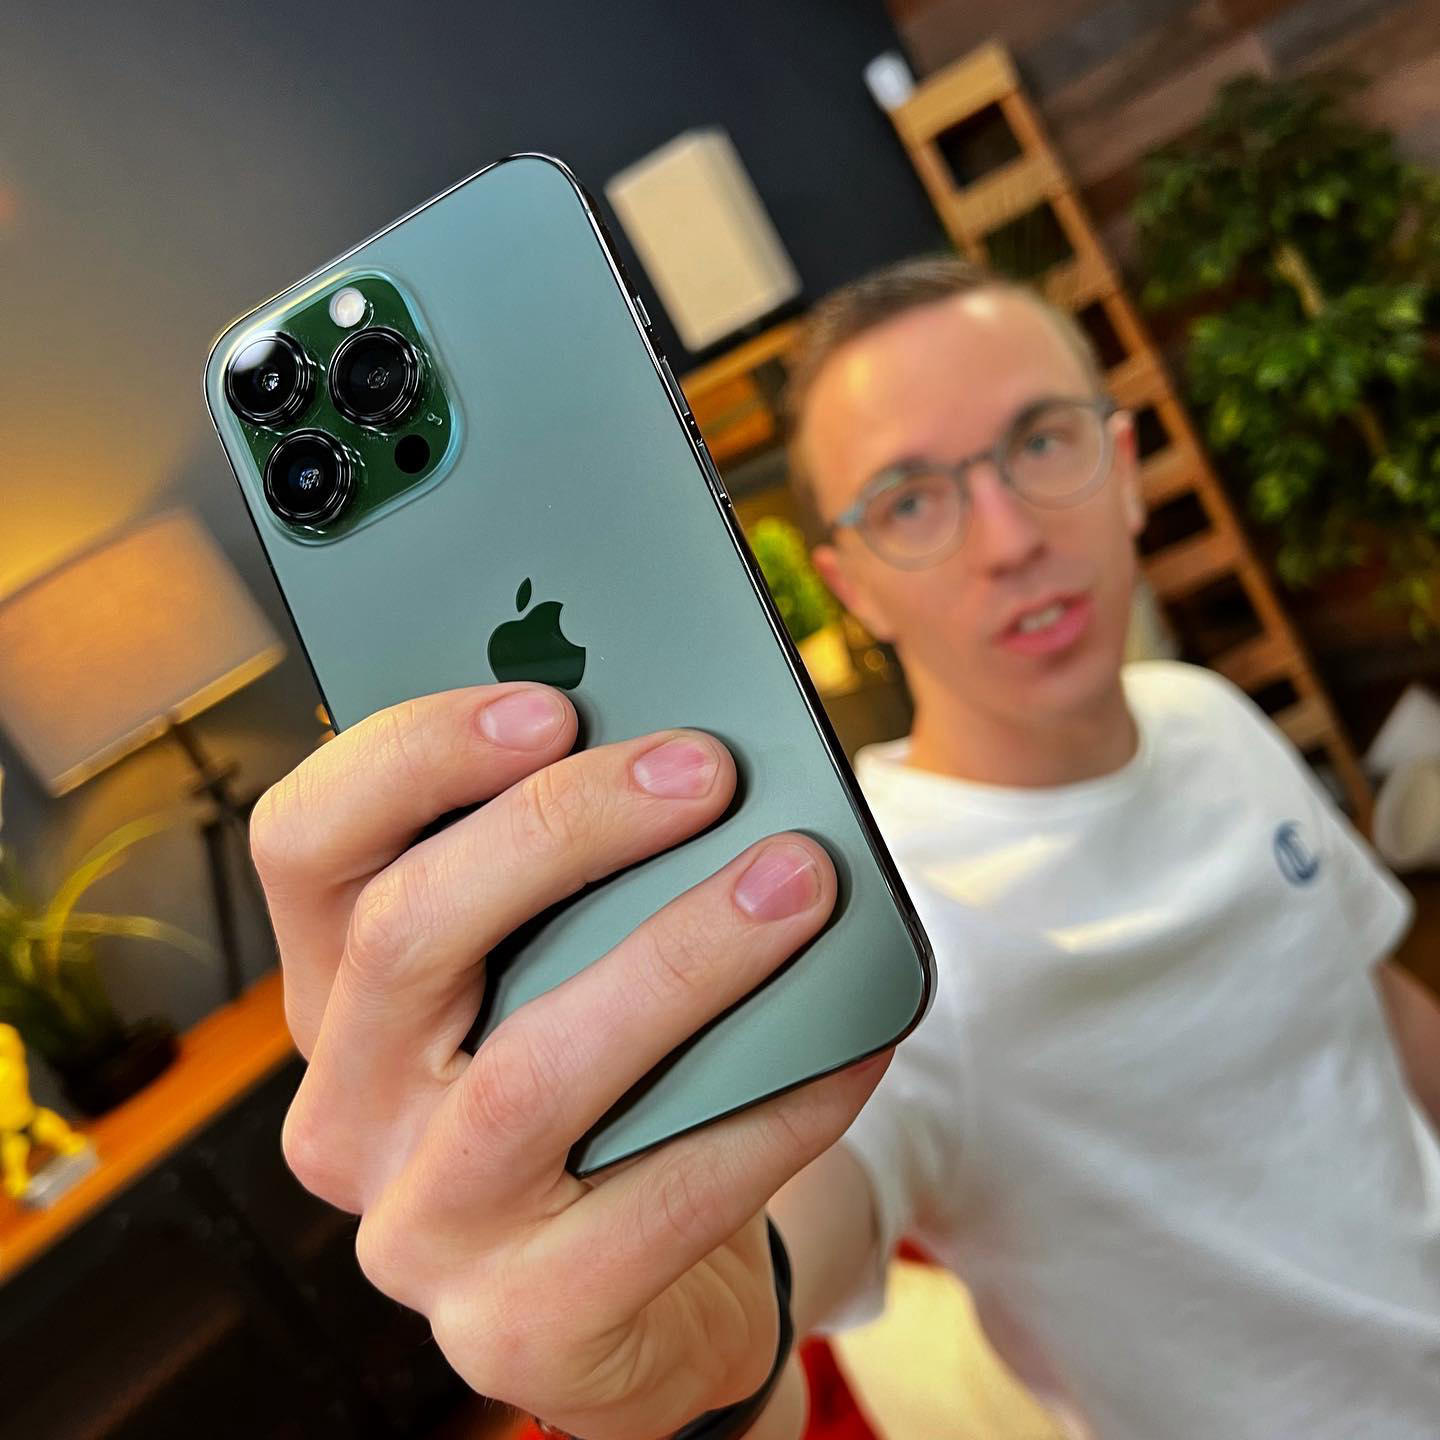 image  1 Austin Evans - ngl the new green iPhone 13 Pro might be my favorite colorway on a phone ever